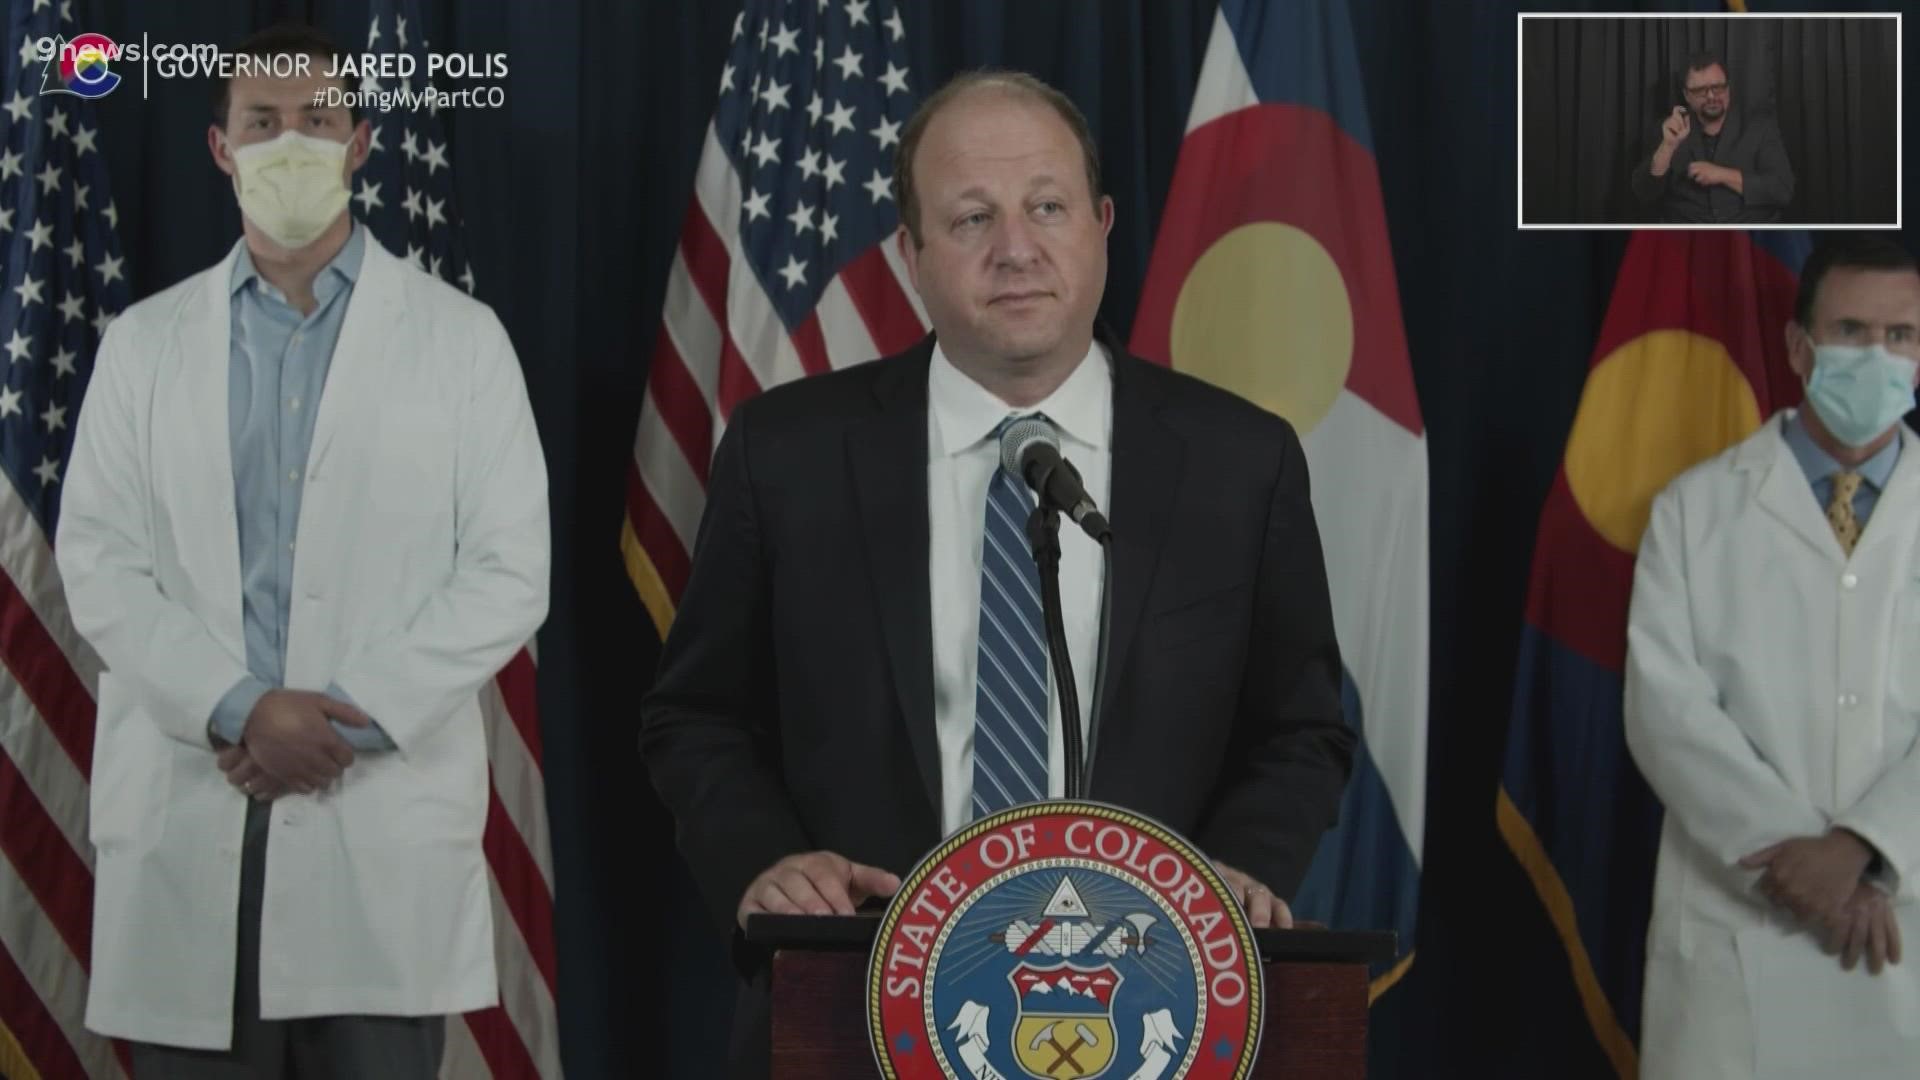 Gov. Jared Polis gave an update on the pandemic as the state's cases and hospitalizations hit their highest levels since January.